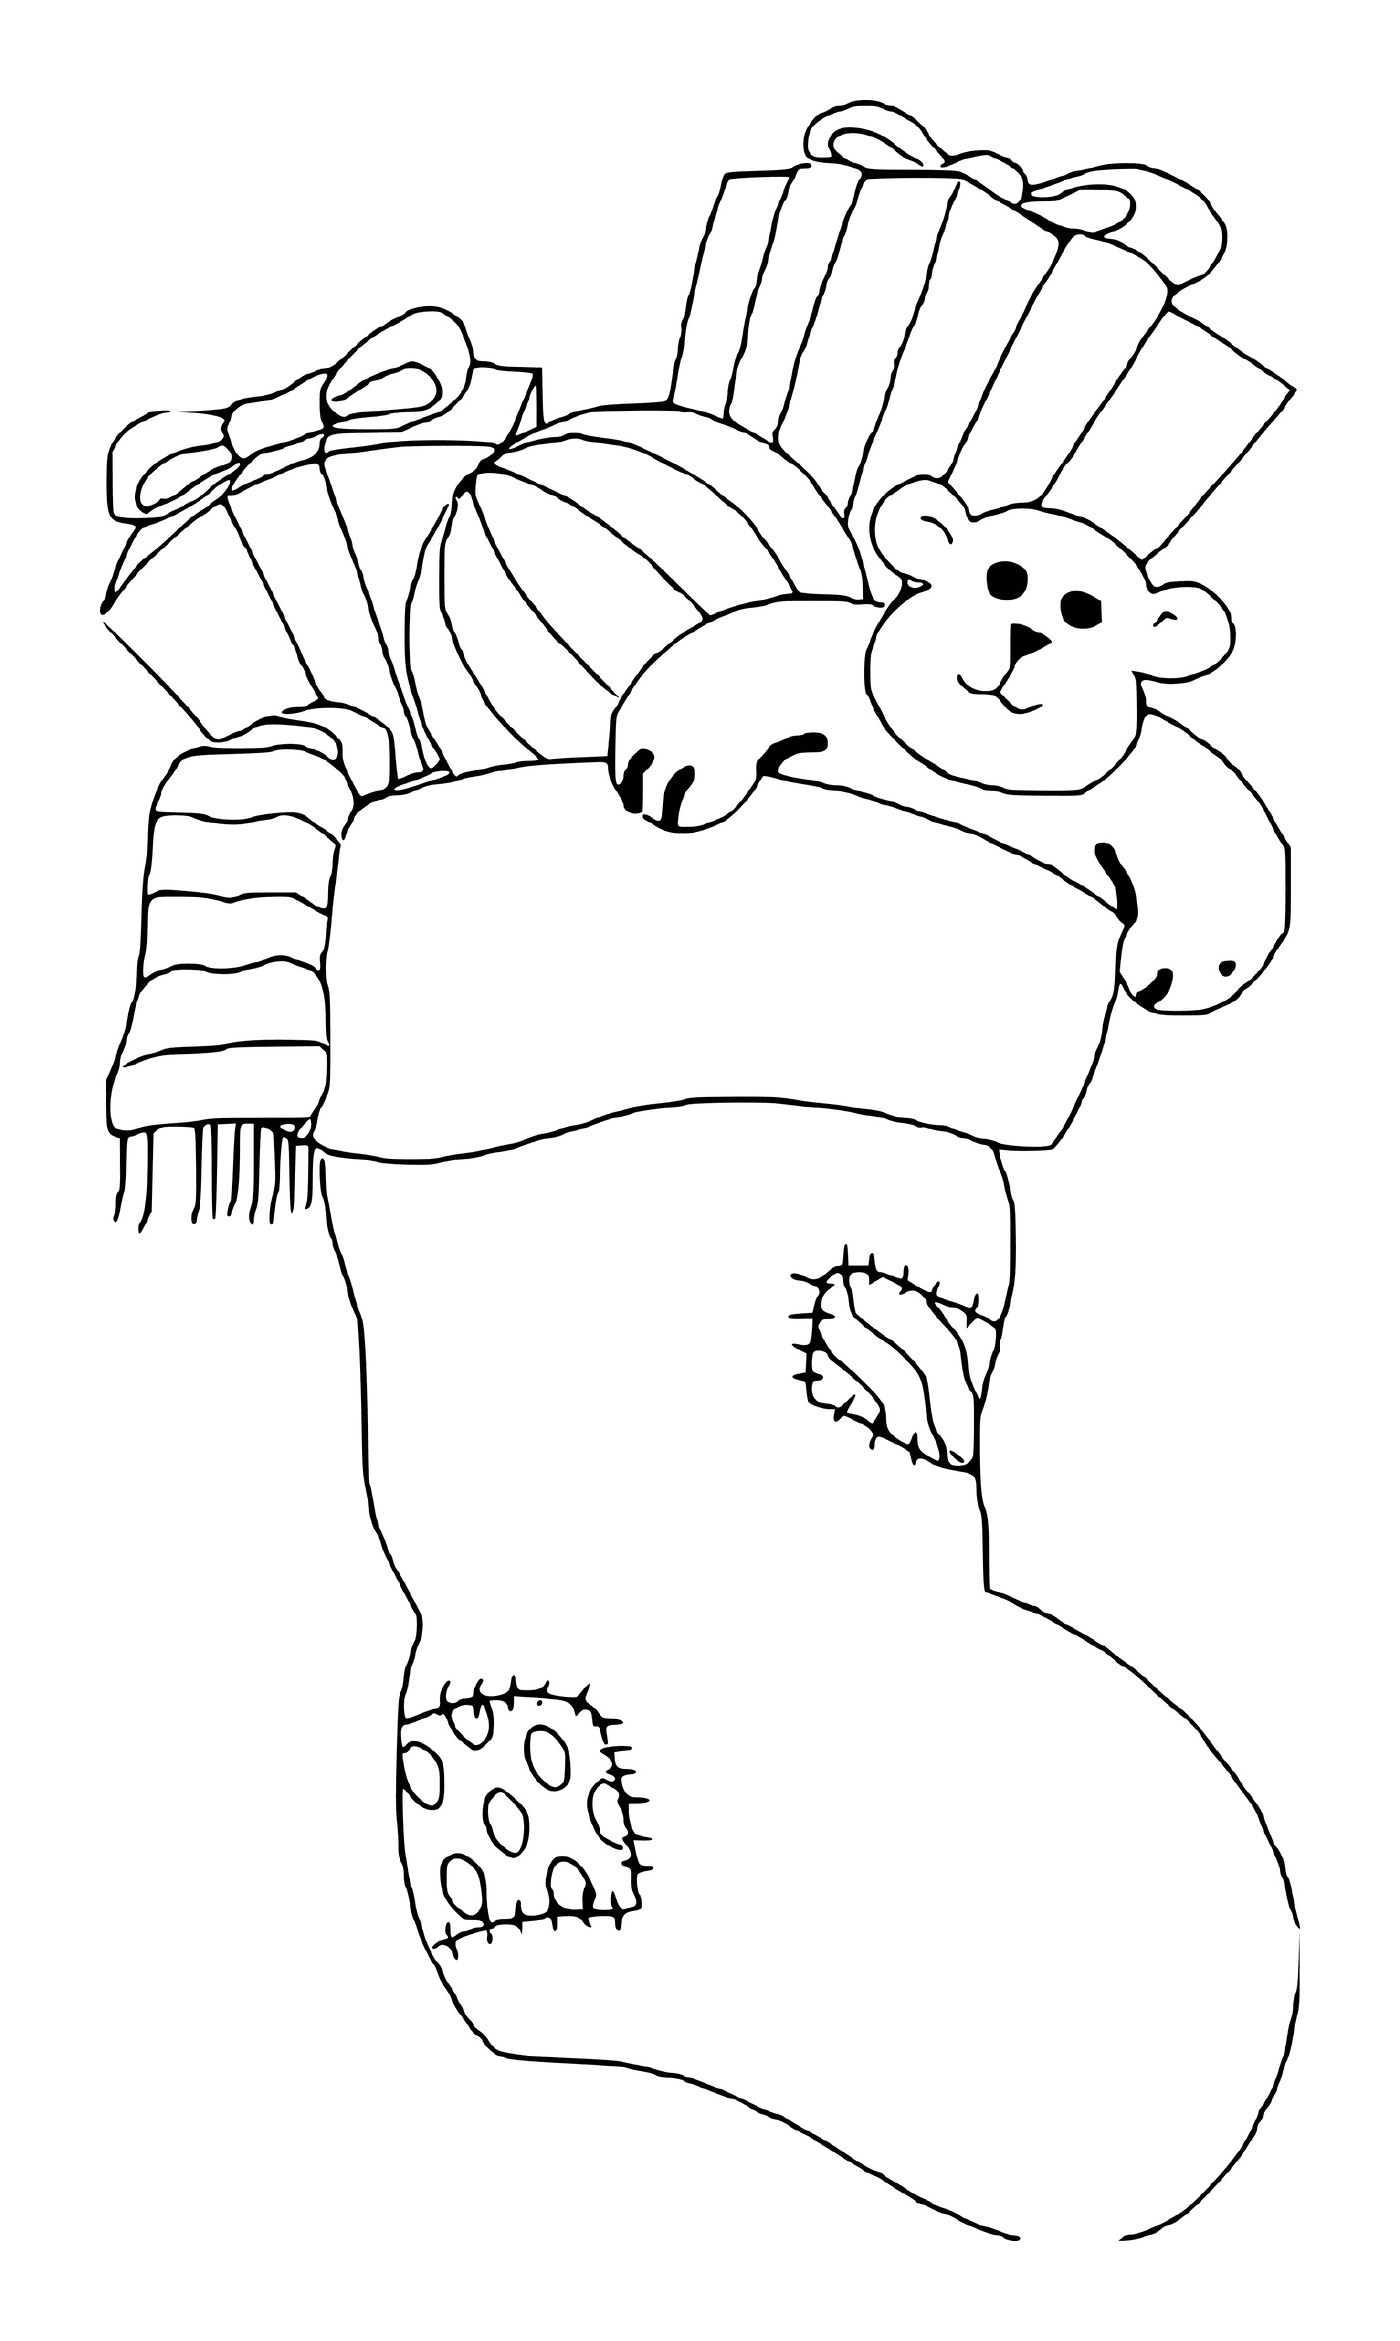  Teddy bear and gifts in a Christmas stockings 